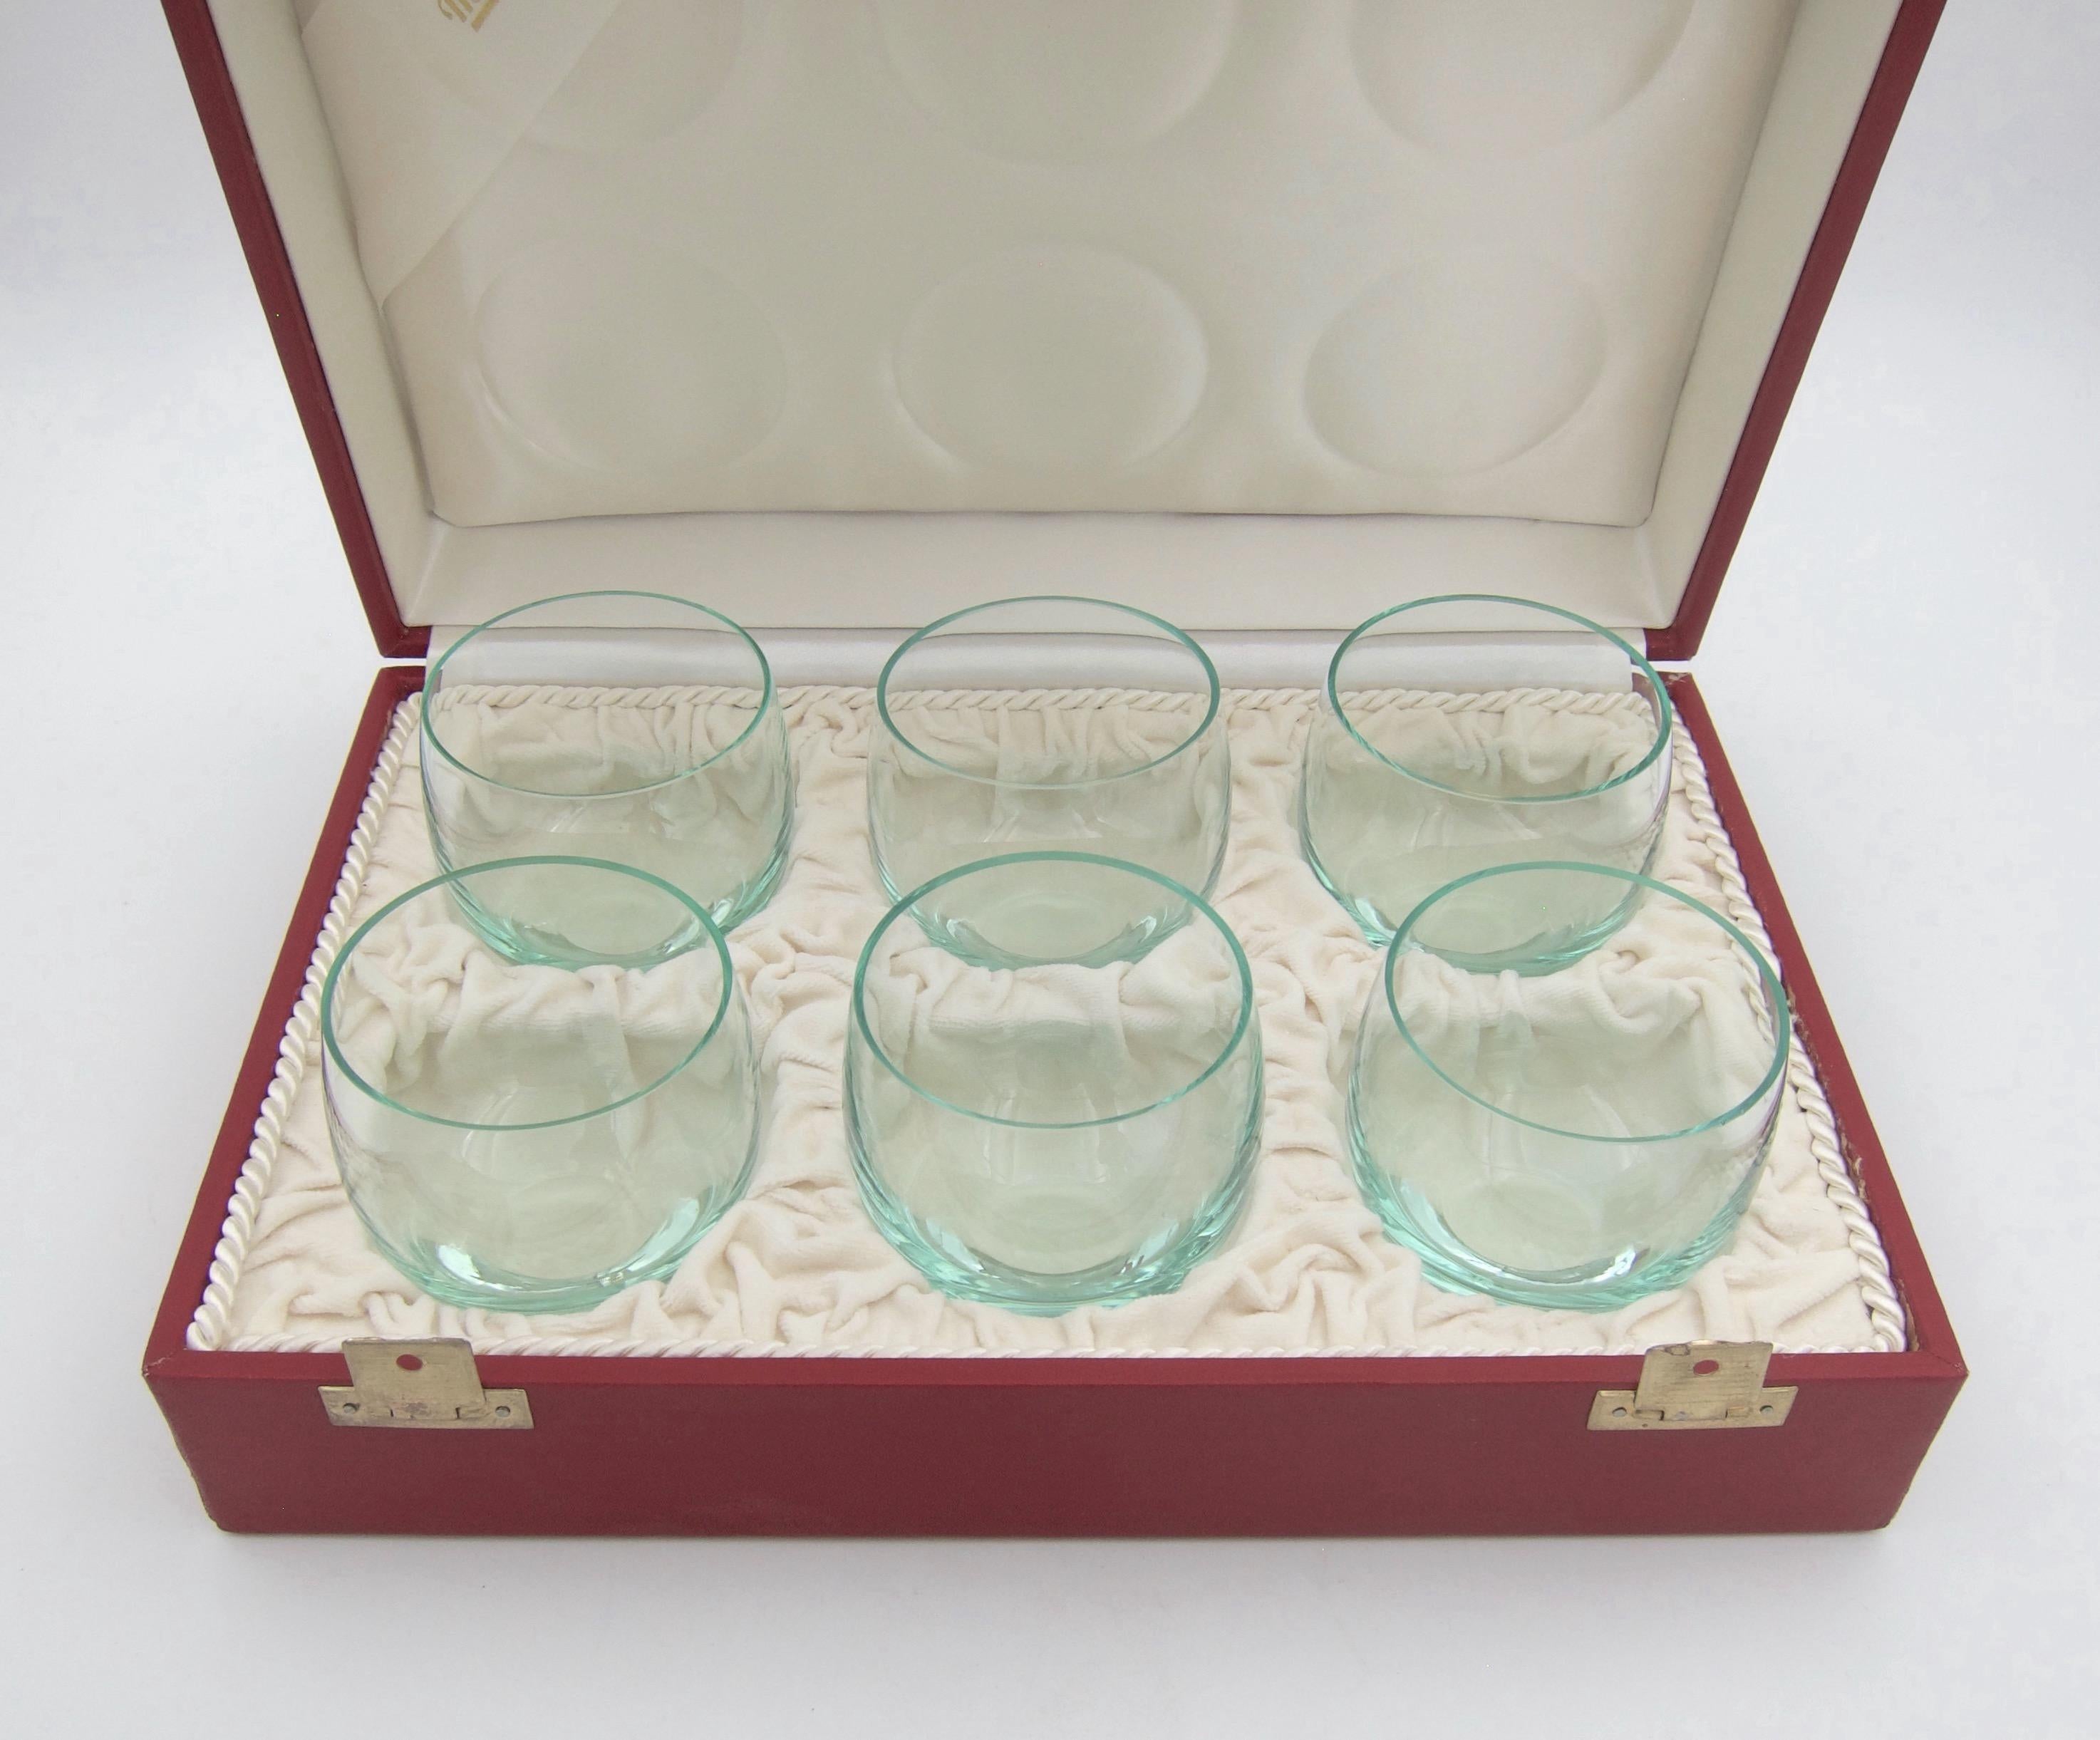 A vintage boxed set of six Moser Culbuto tumbler glasses in Beryl green crystal. The Culbuto collection of drinkware was designed by Rudolf Eschler for Moser in 1935. Although designed during the Art Deco period, the minimalist silhouette became a